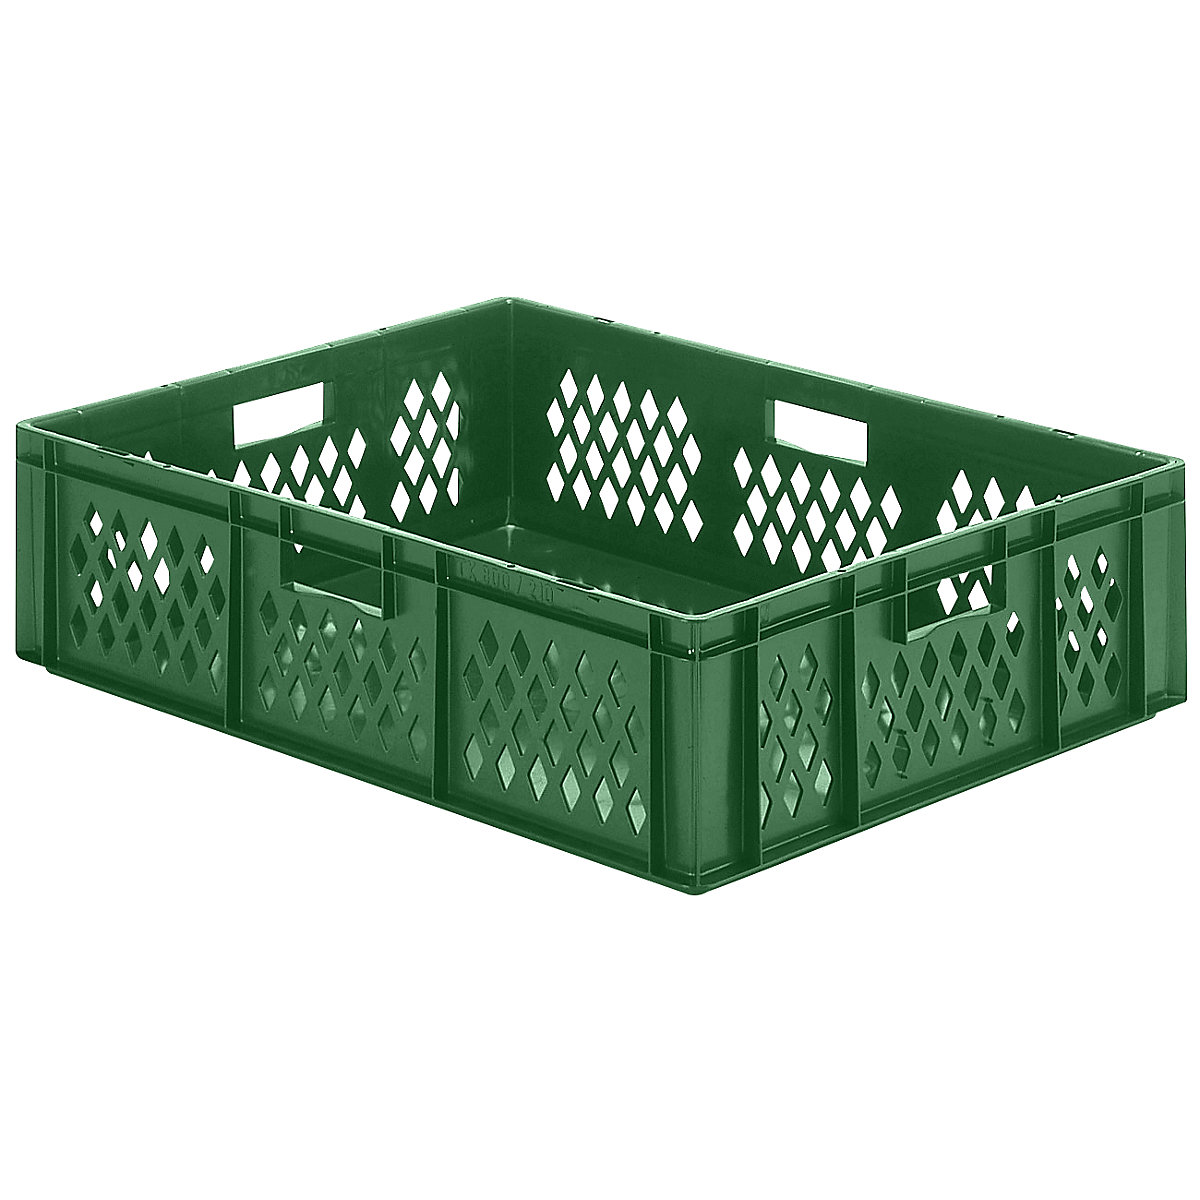 Euro stacking container, perforated walls, closed base, LxWxH 800 x 600 x 210 mm, green, pack of 2